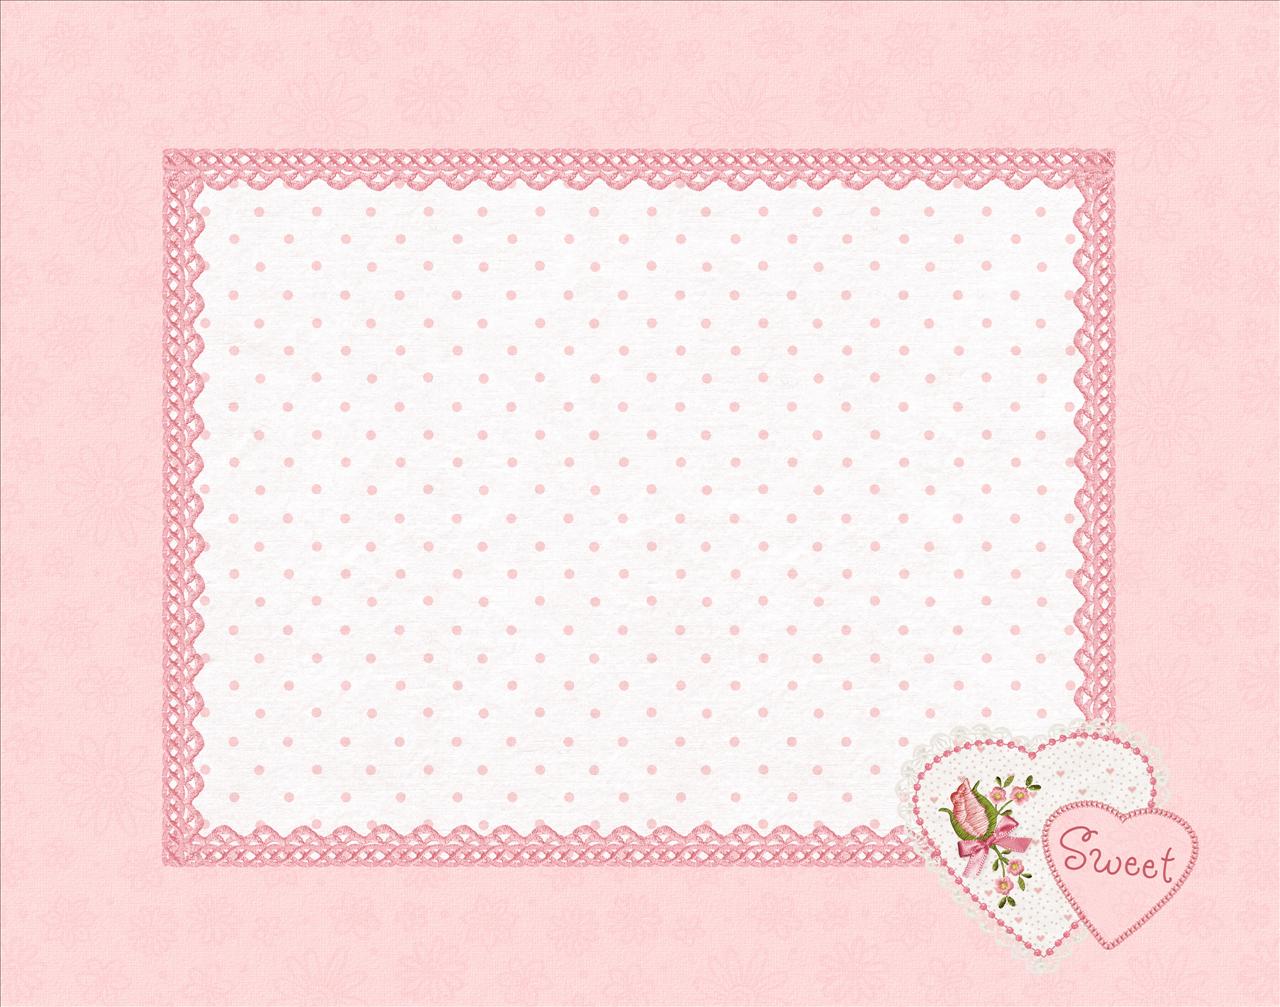 Sweet Baby PPT Backgrounds, Sweet Baby ppt photos, Sweet Baby ppt ...